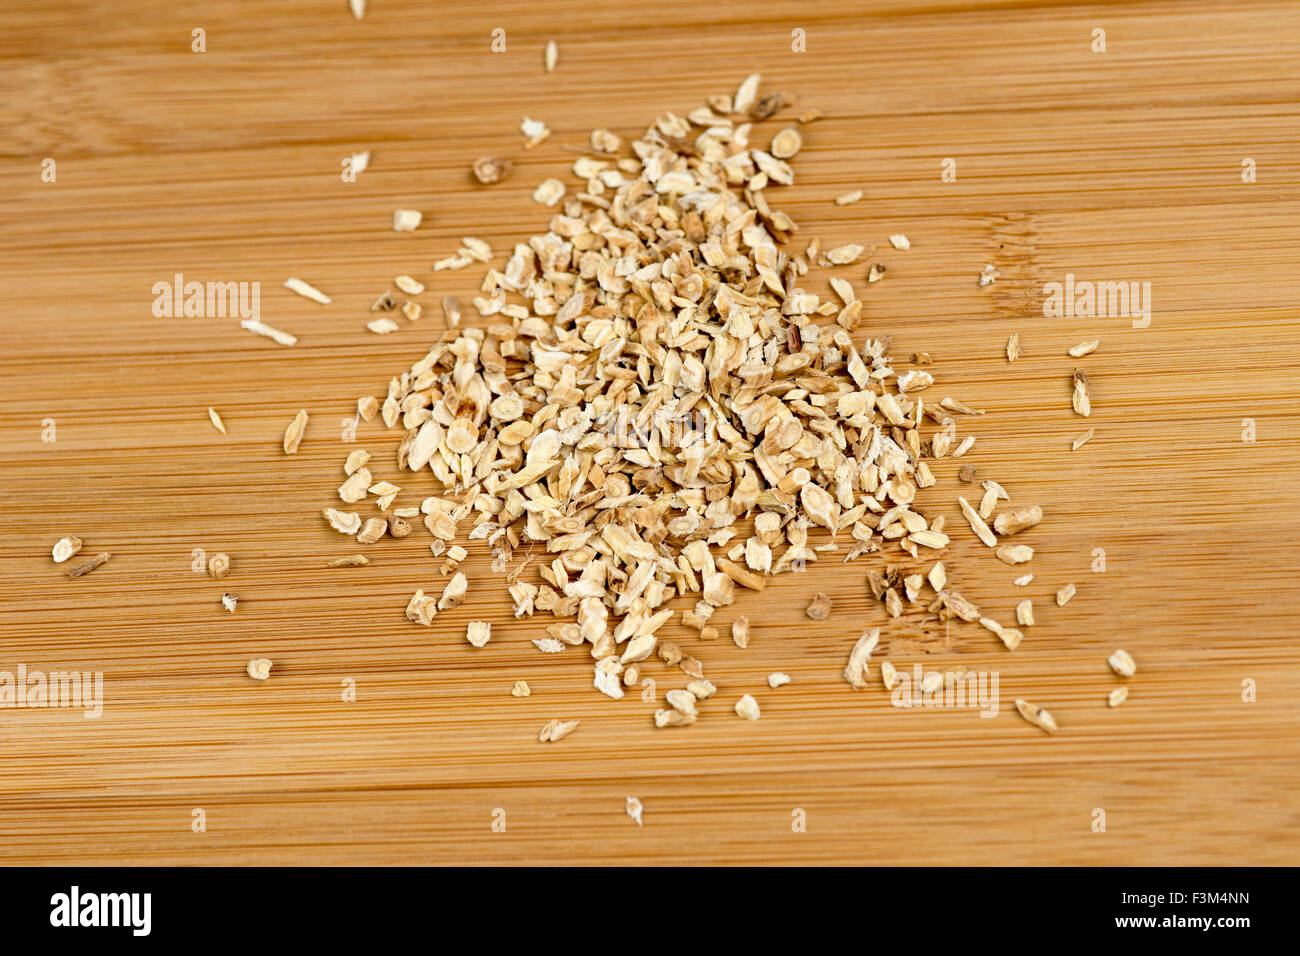 Astragalus membranaceus against a wooden board Stock Photo